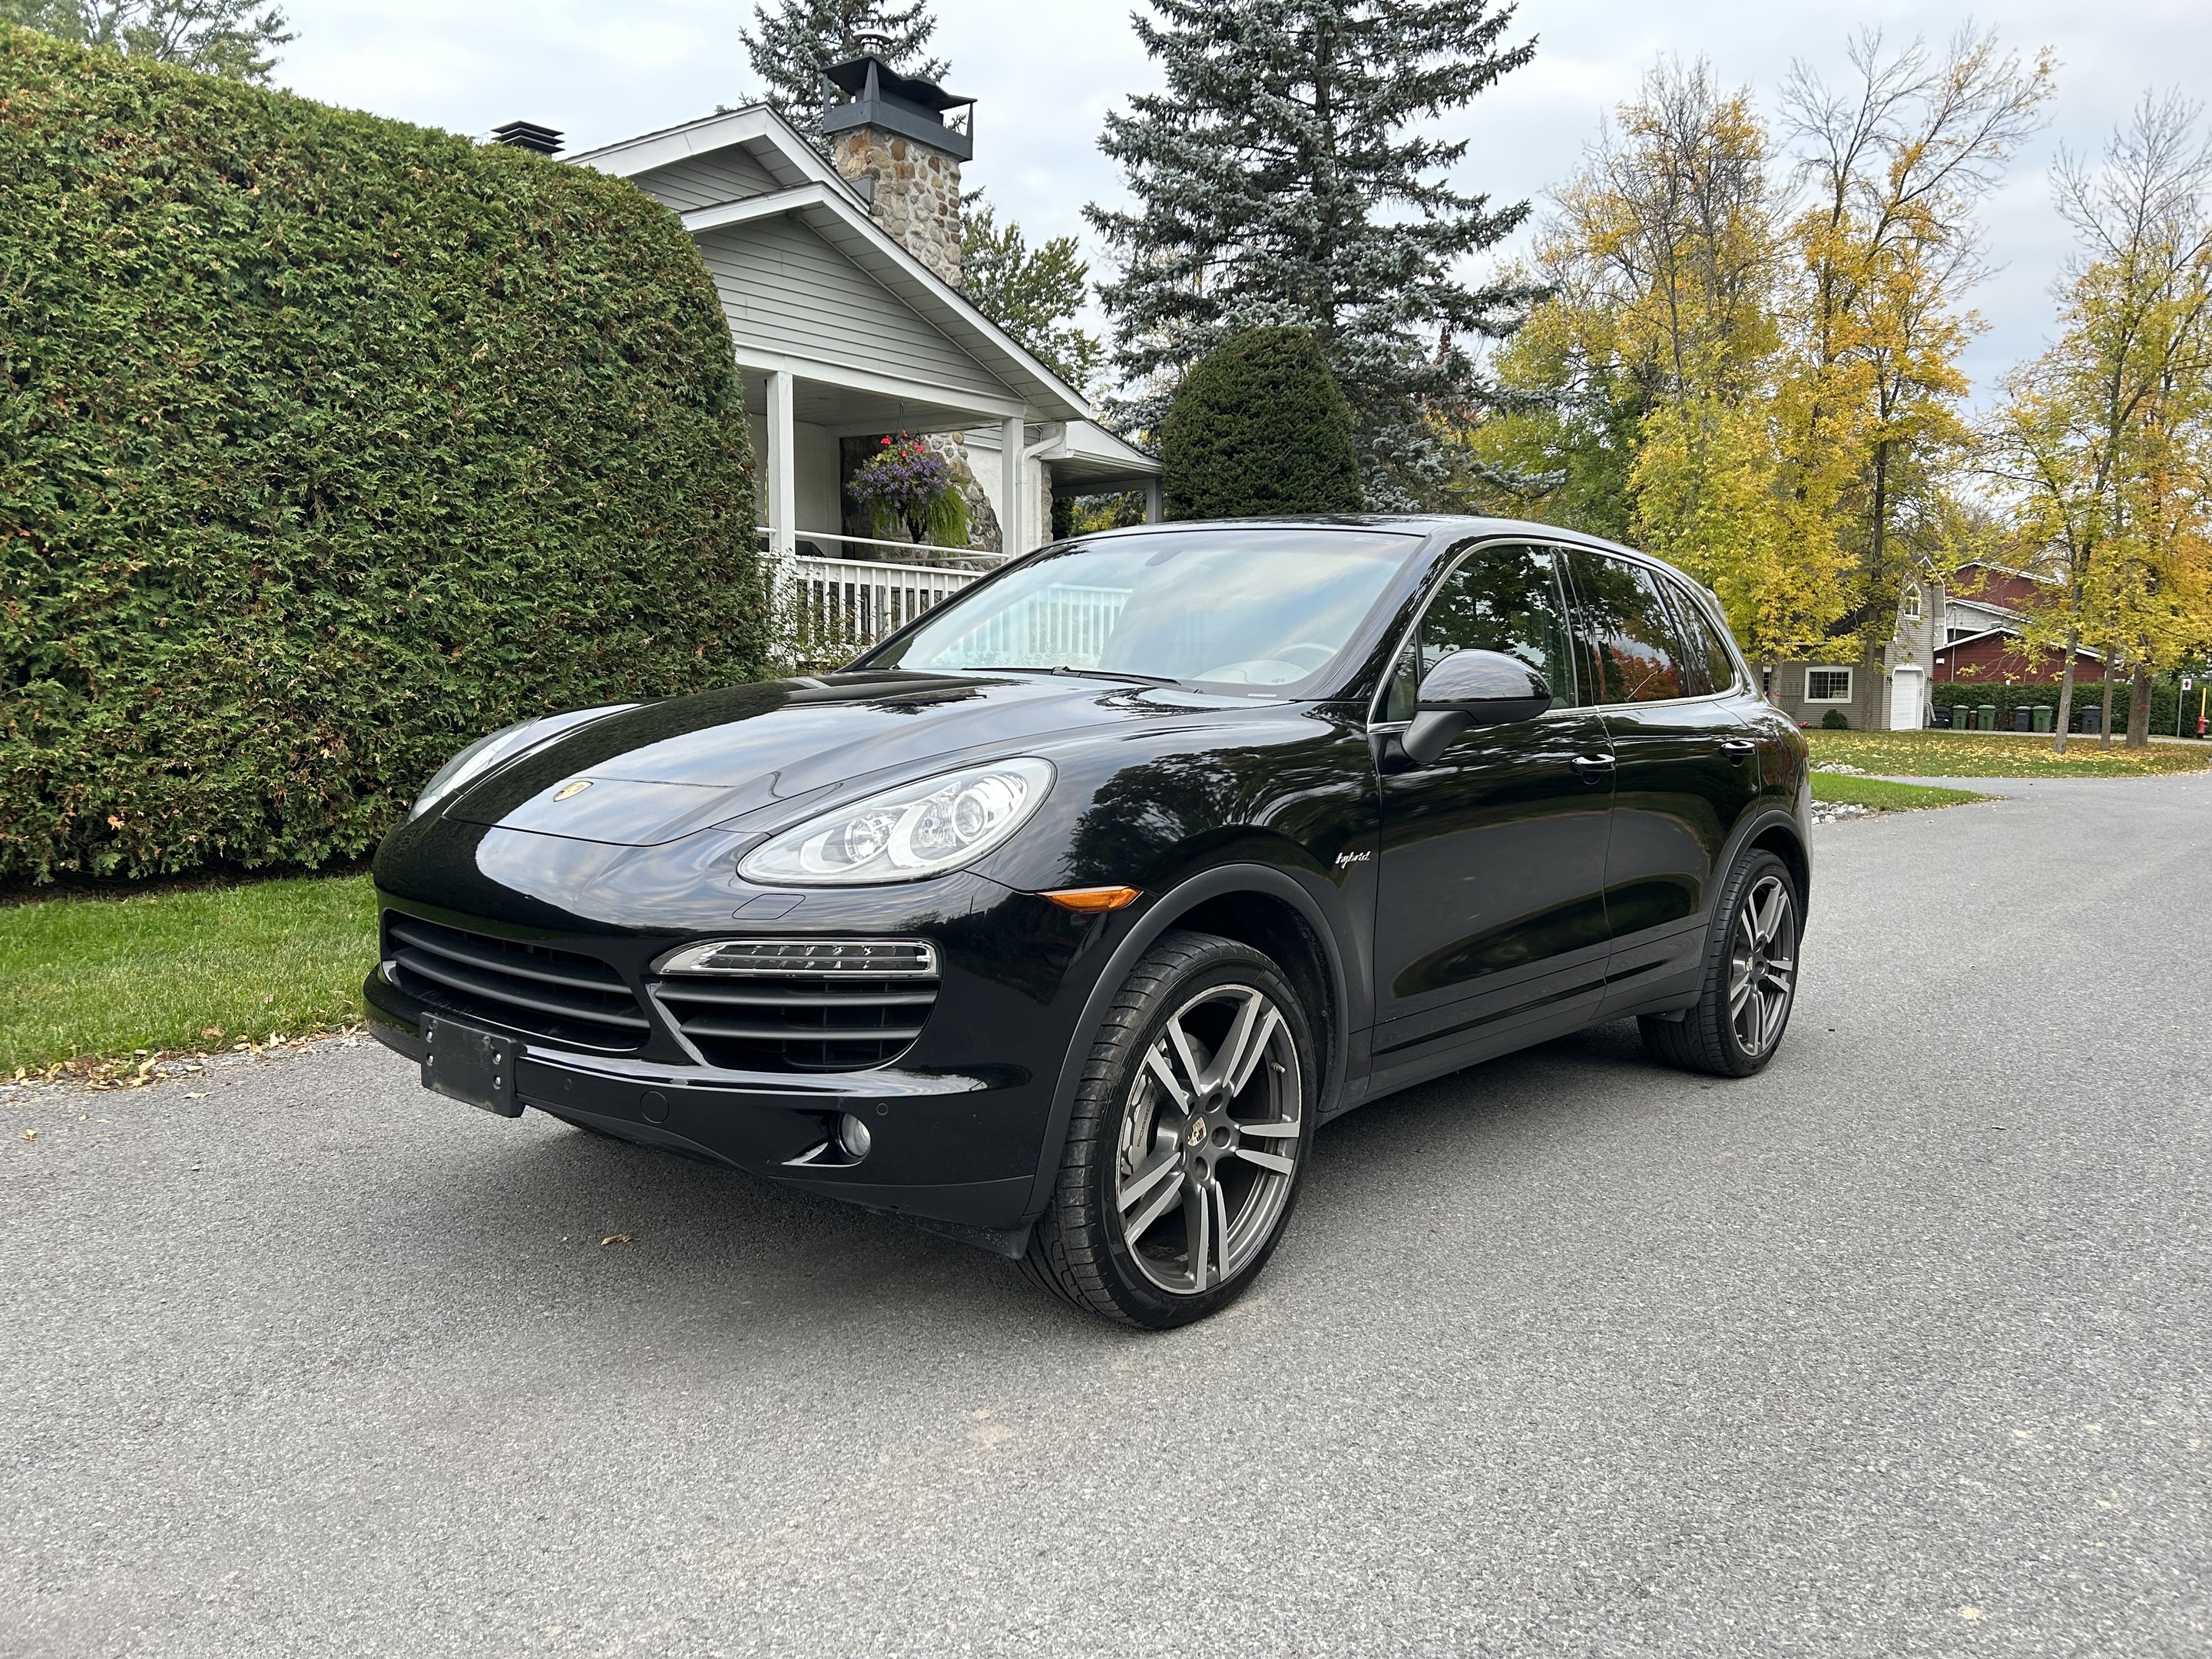 2011 Porsche Cayenne AWD 4dr S Hybrid | LOW MILEAGE | FULLY DETAILED